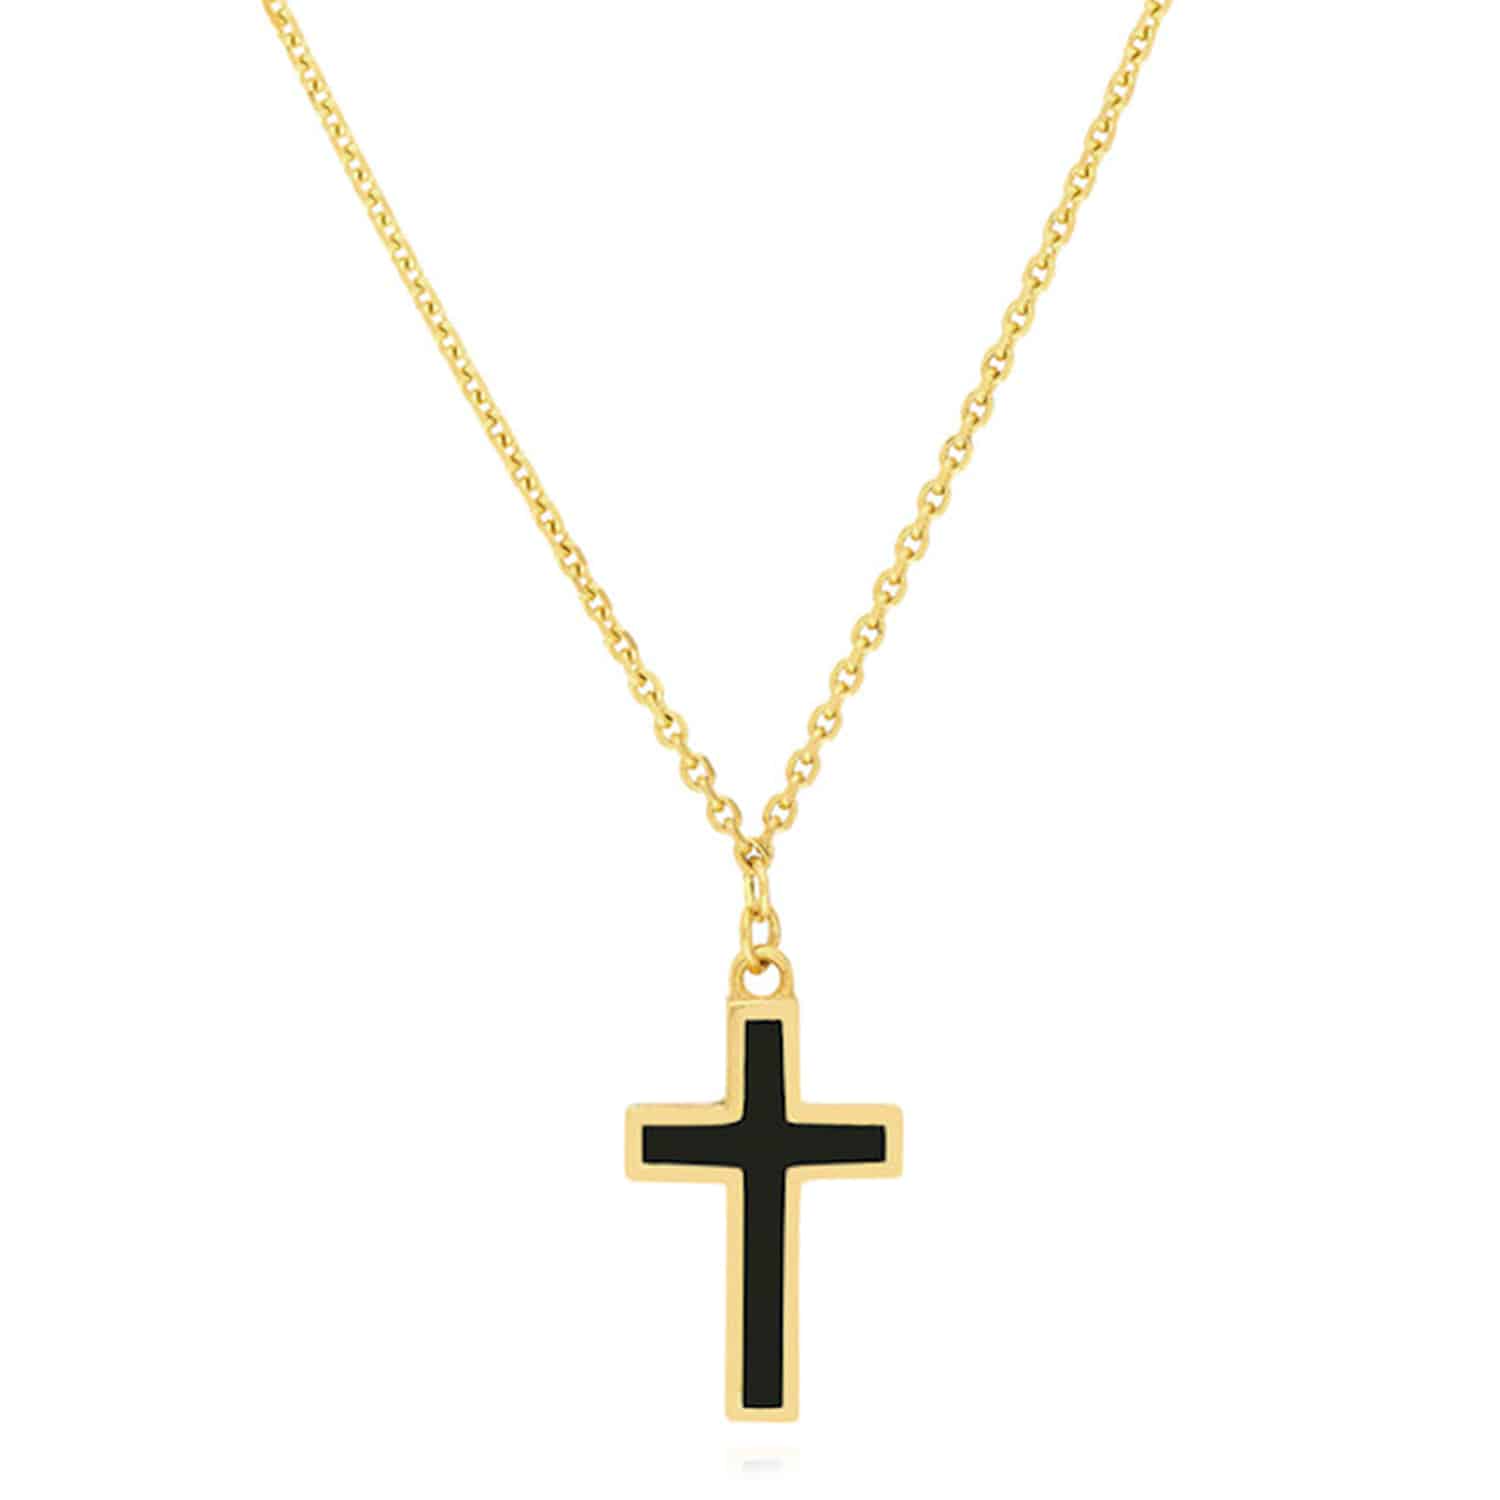 14K Yellow Gold Cable Turquoise Enamel Cross Pendant Necklace 16"-18" Adjustable - Black